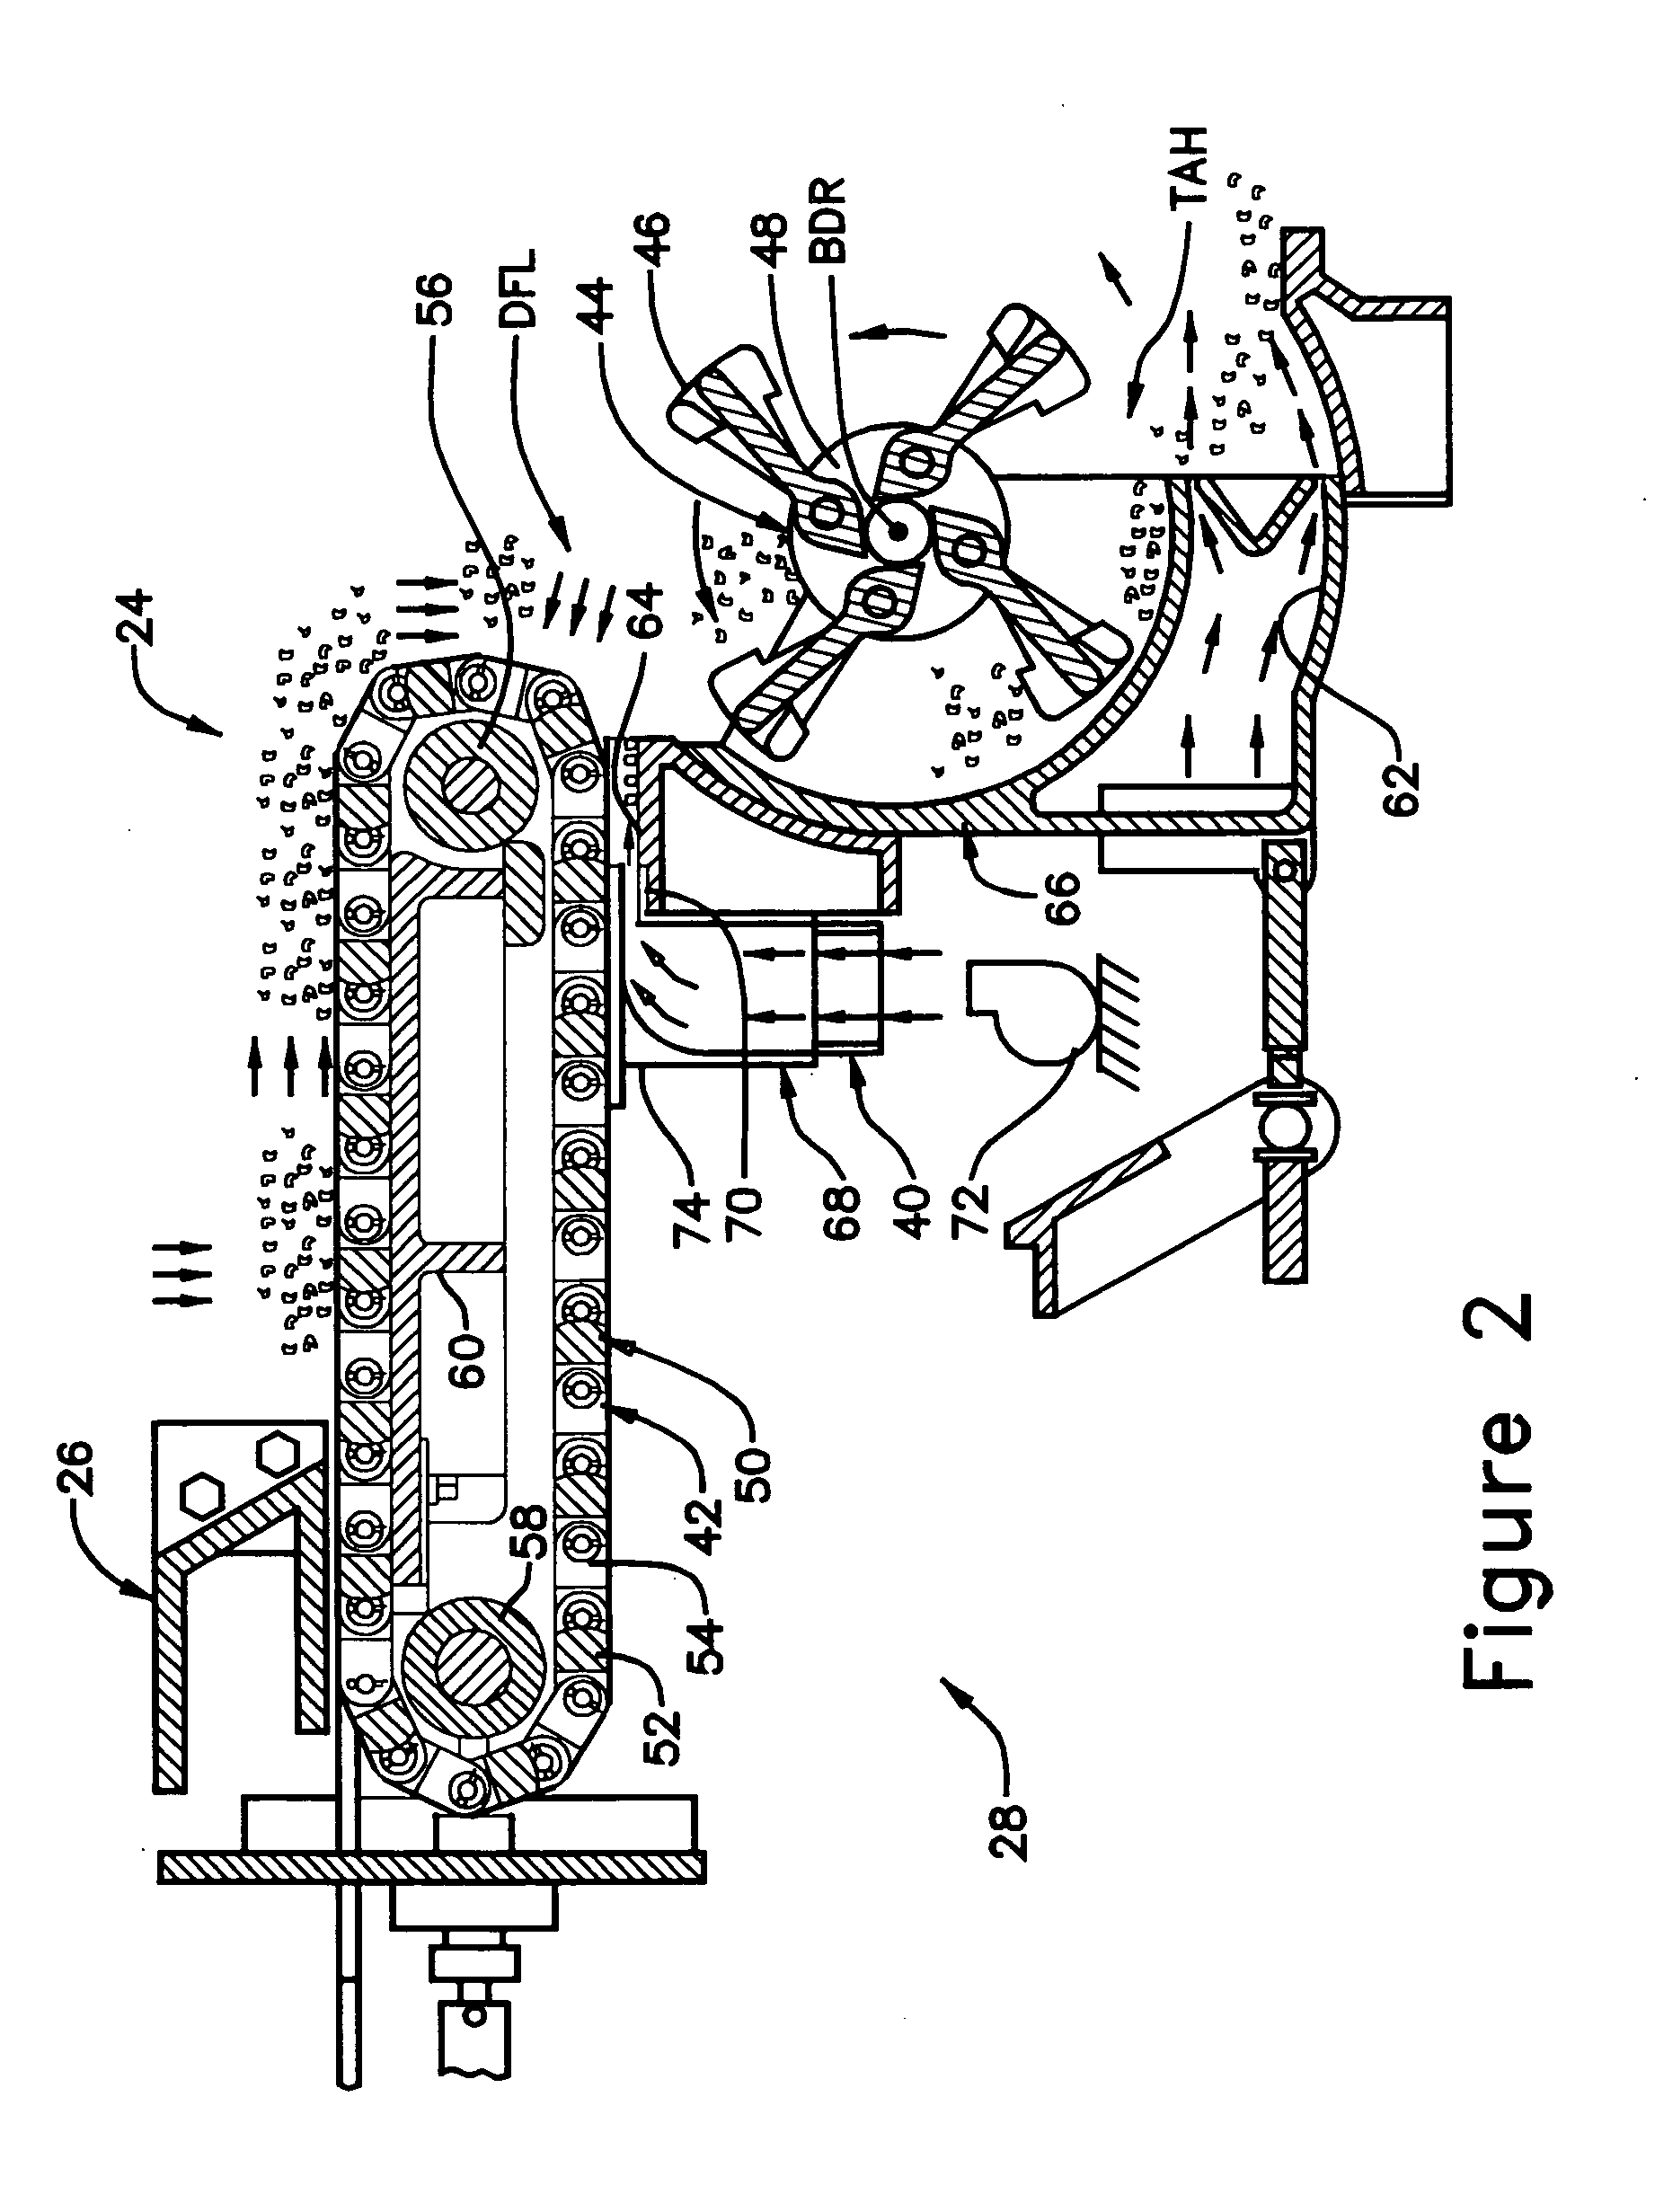 Apparatus for controlling the deposition of feed material on a deposition build-up surface